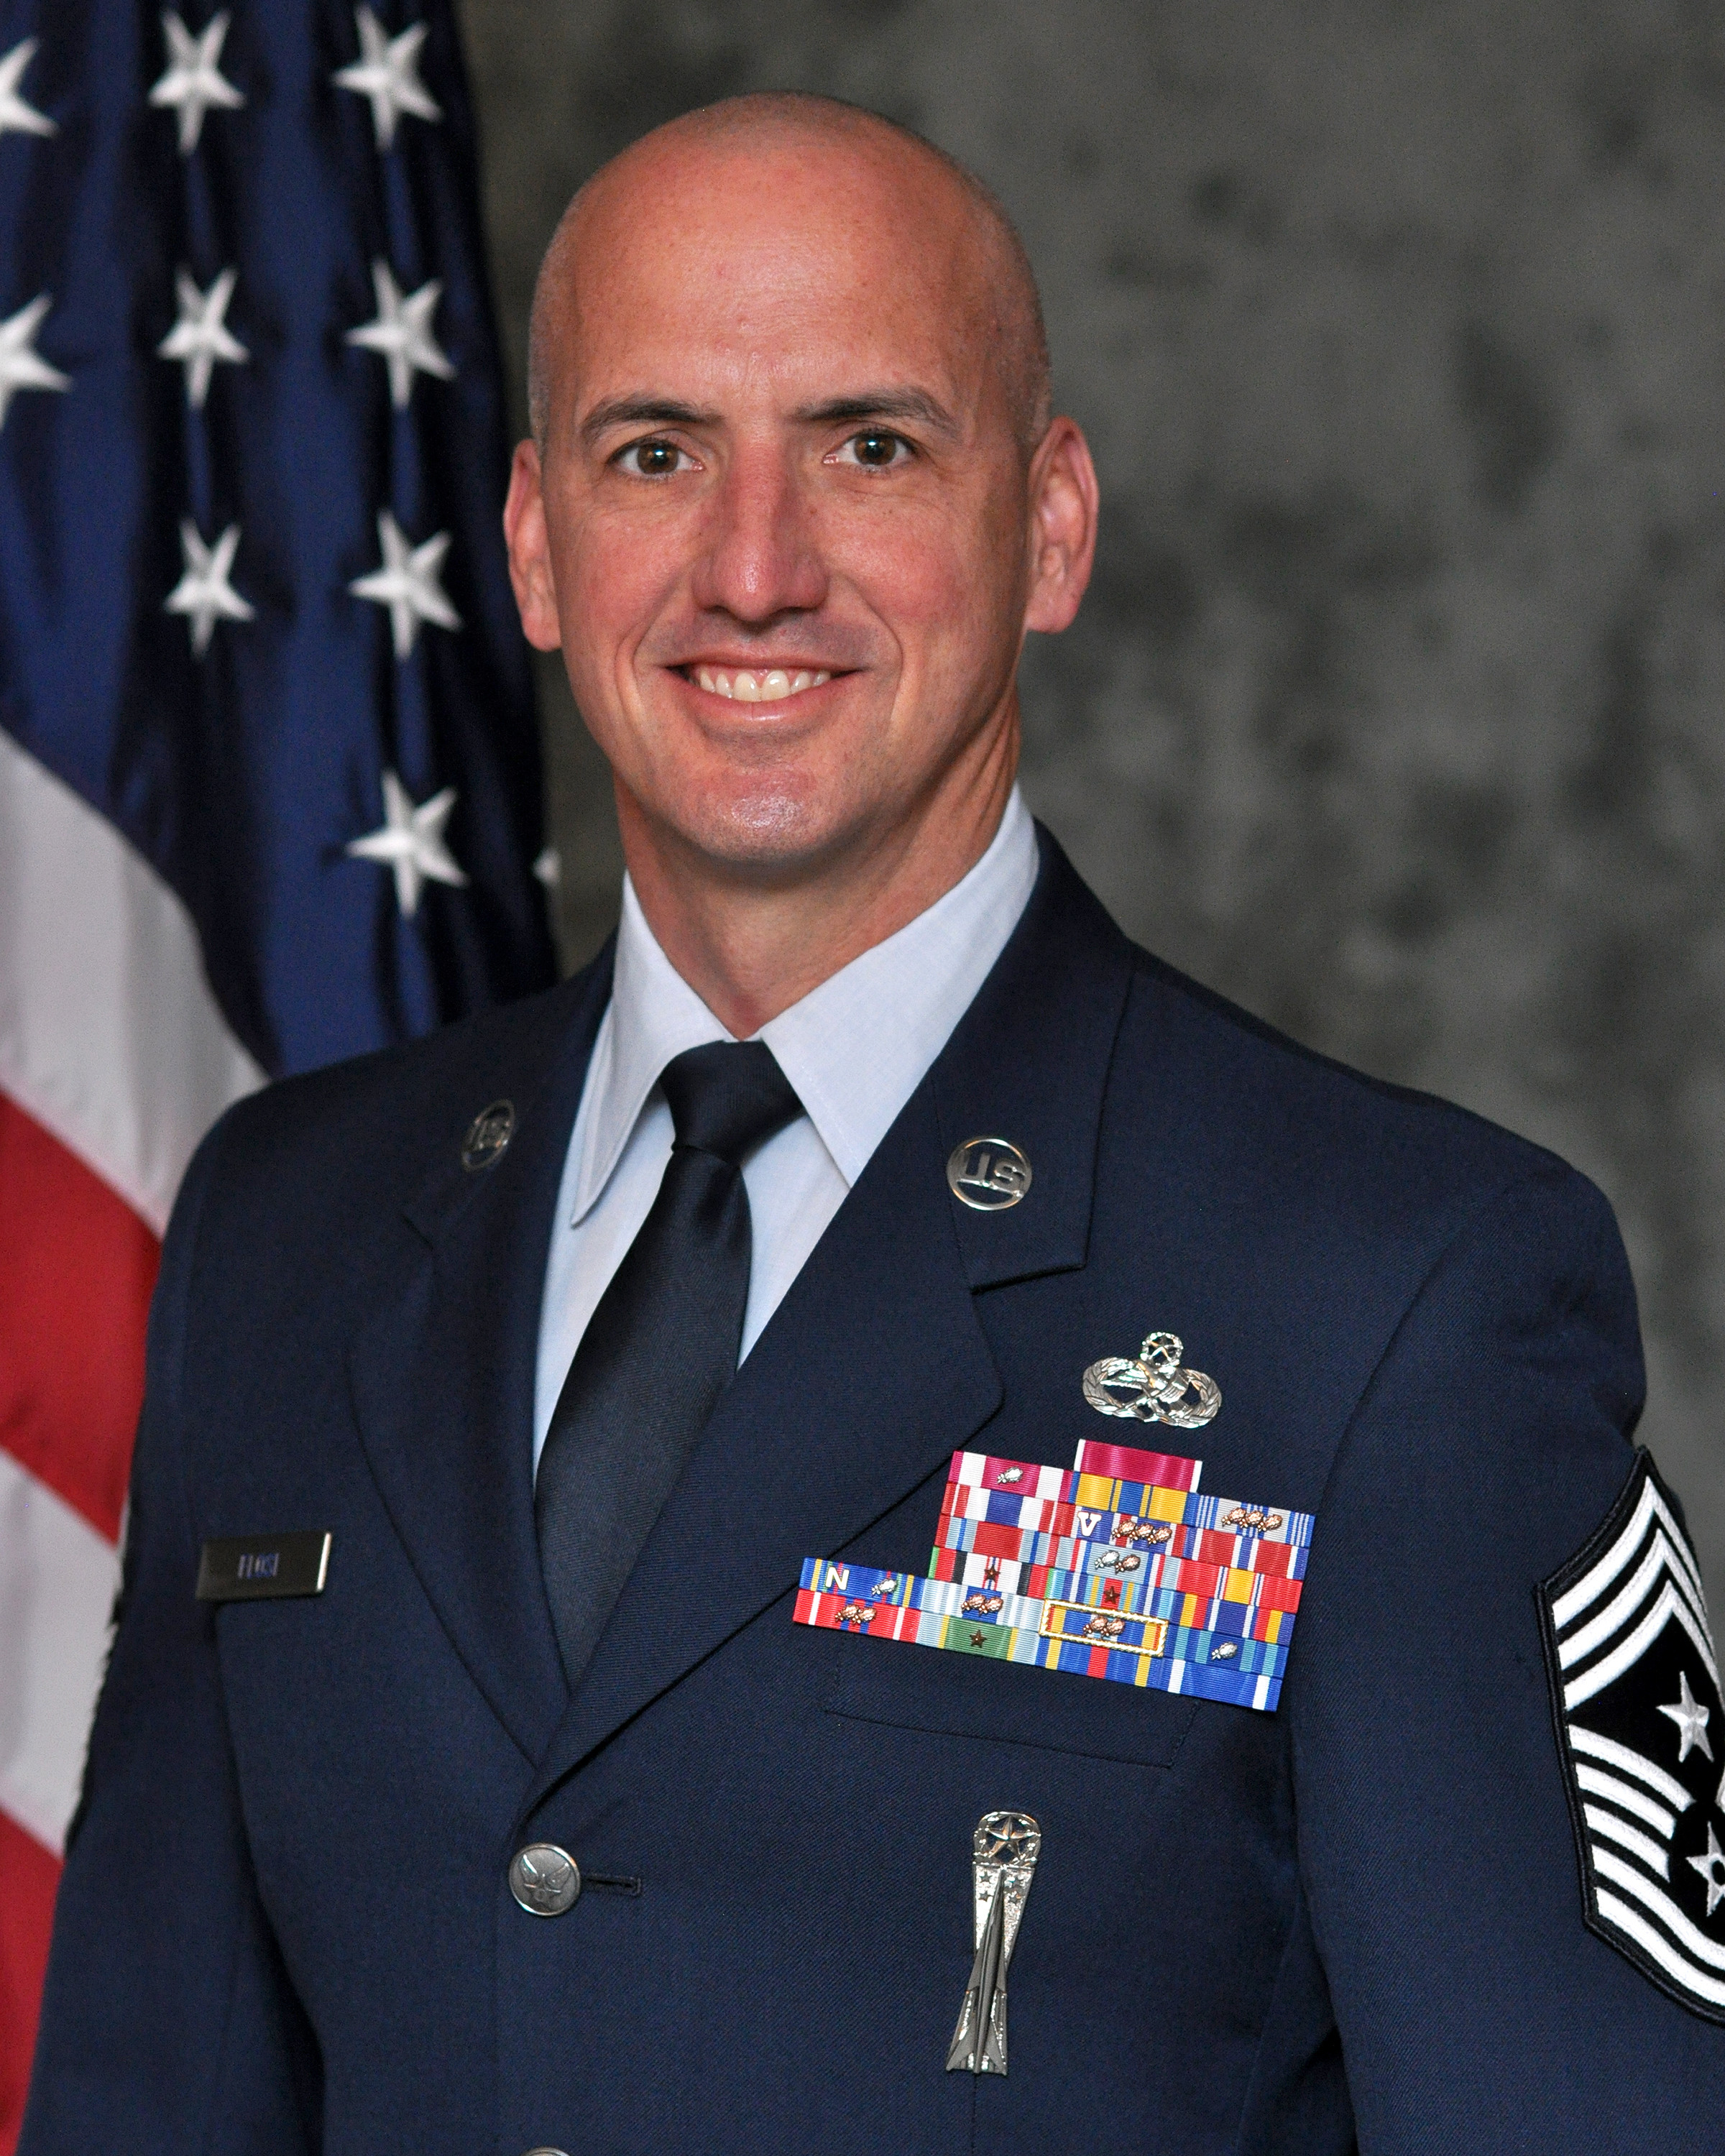 New AFMC command chief named > Air Force Base > Article Display